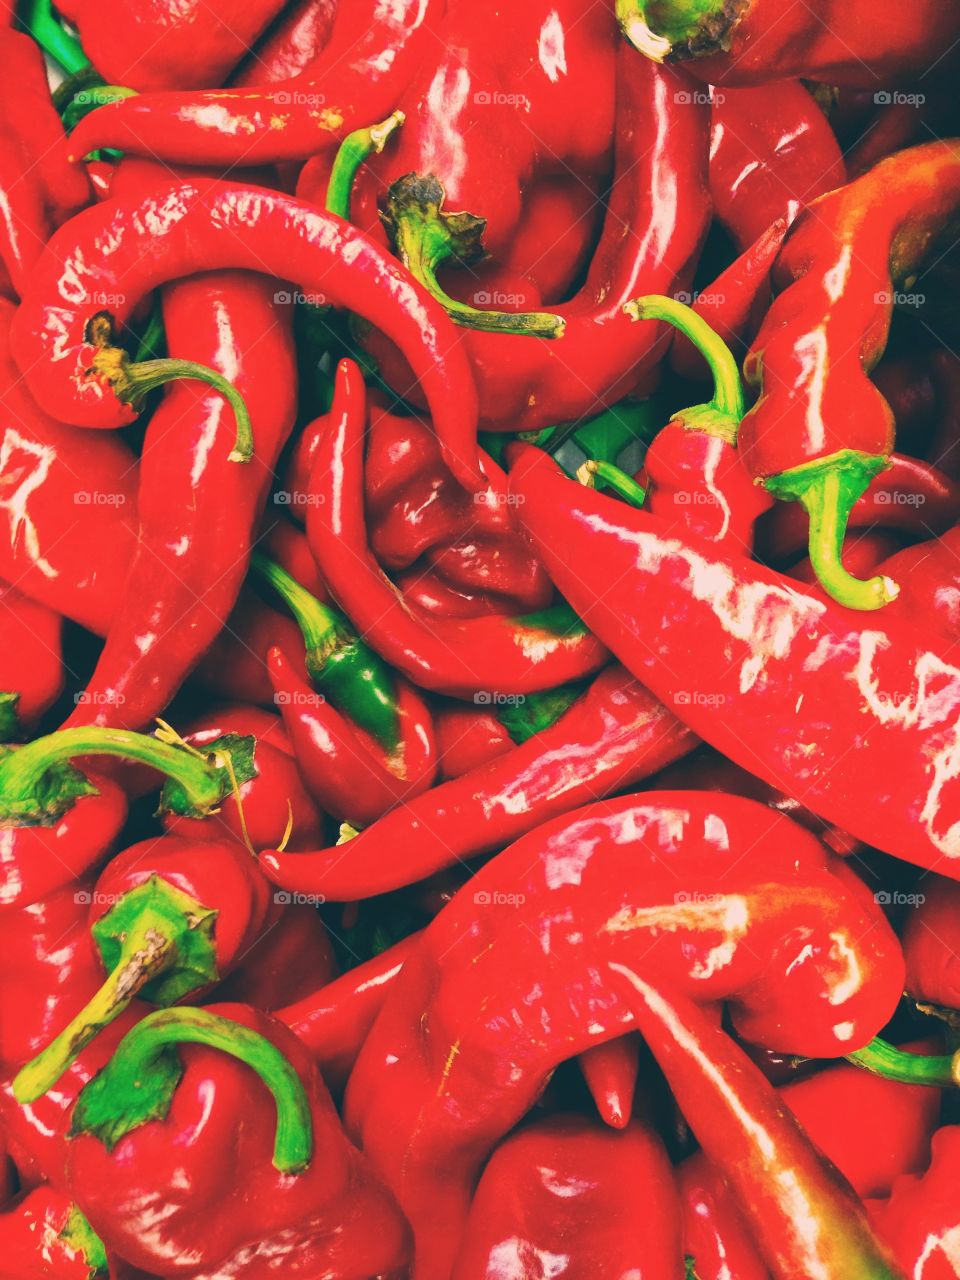 Peppers! . Red and spicy! 